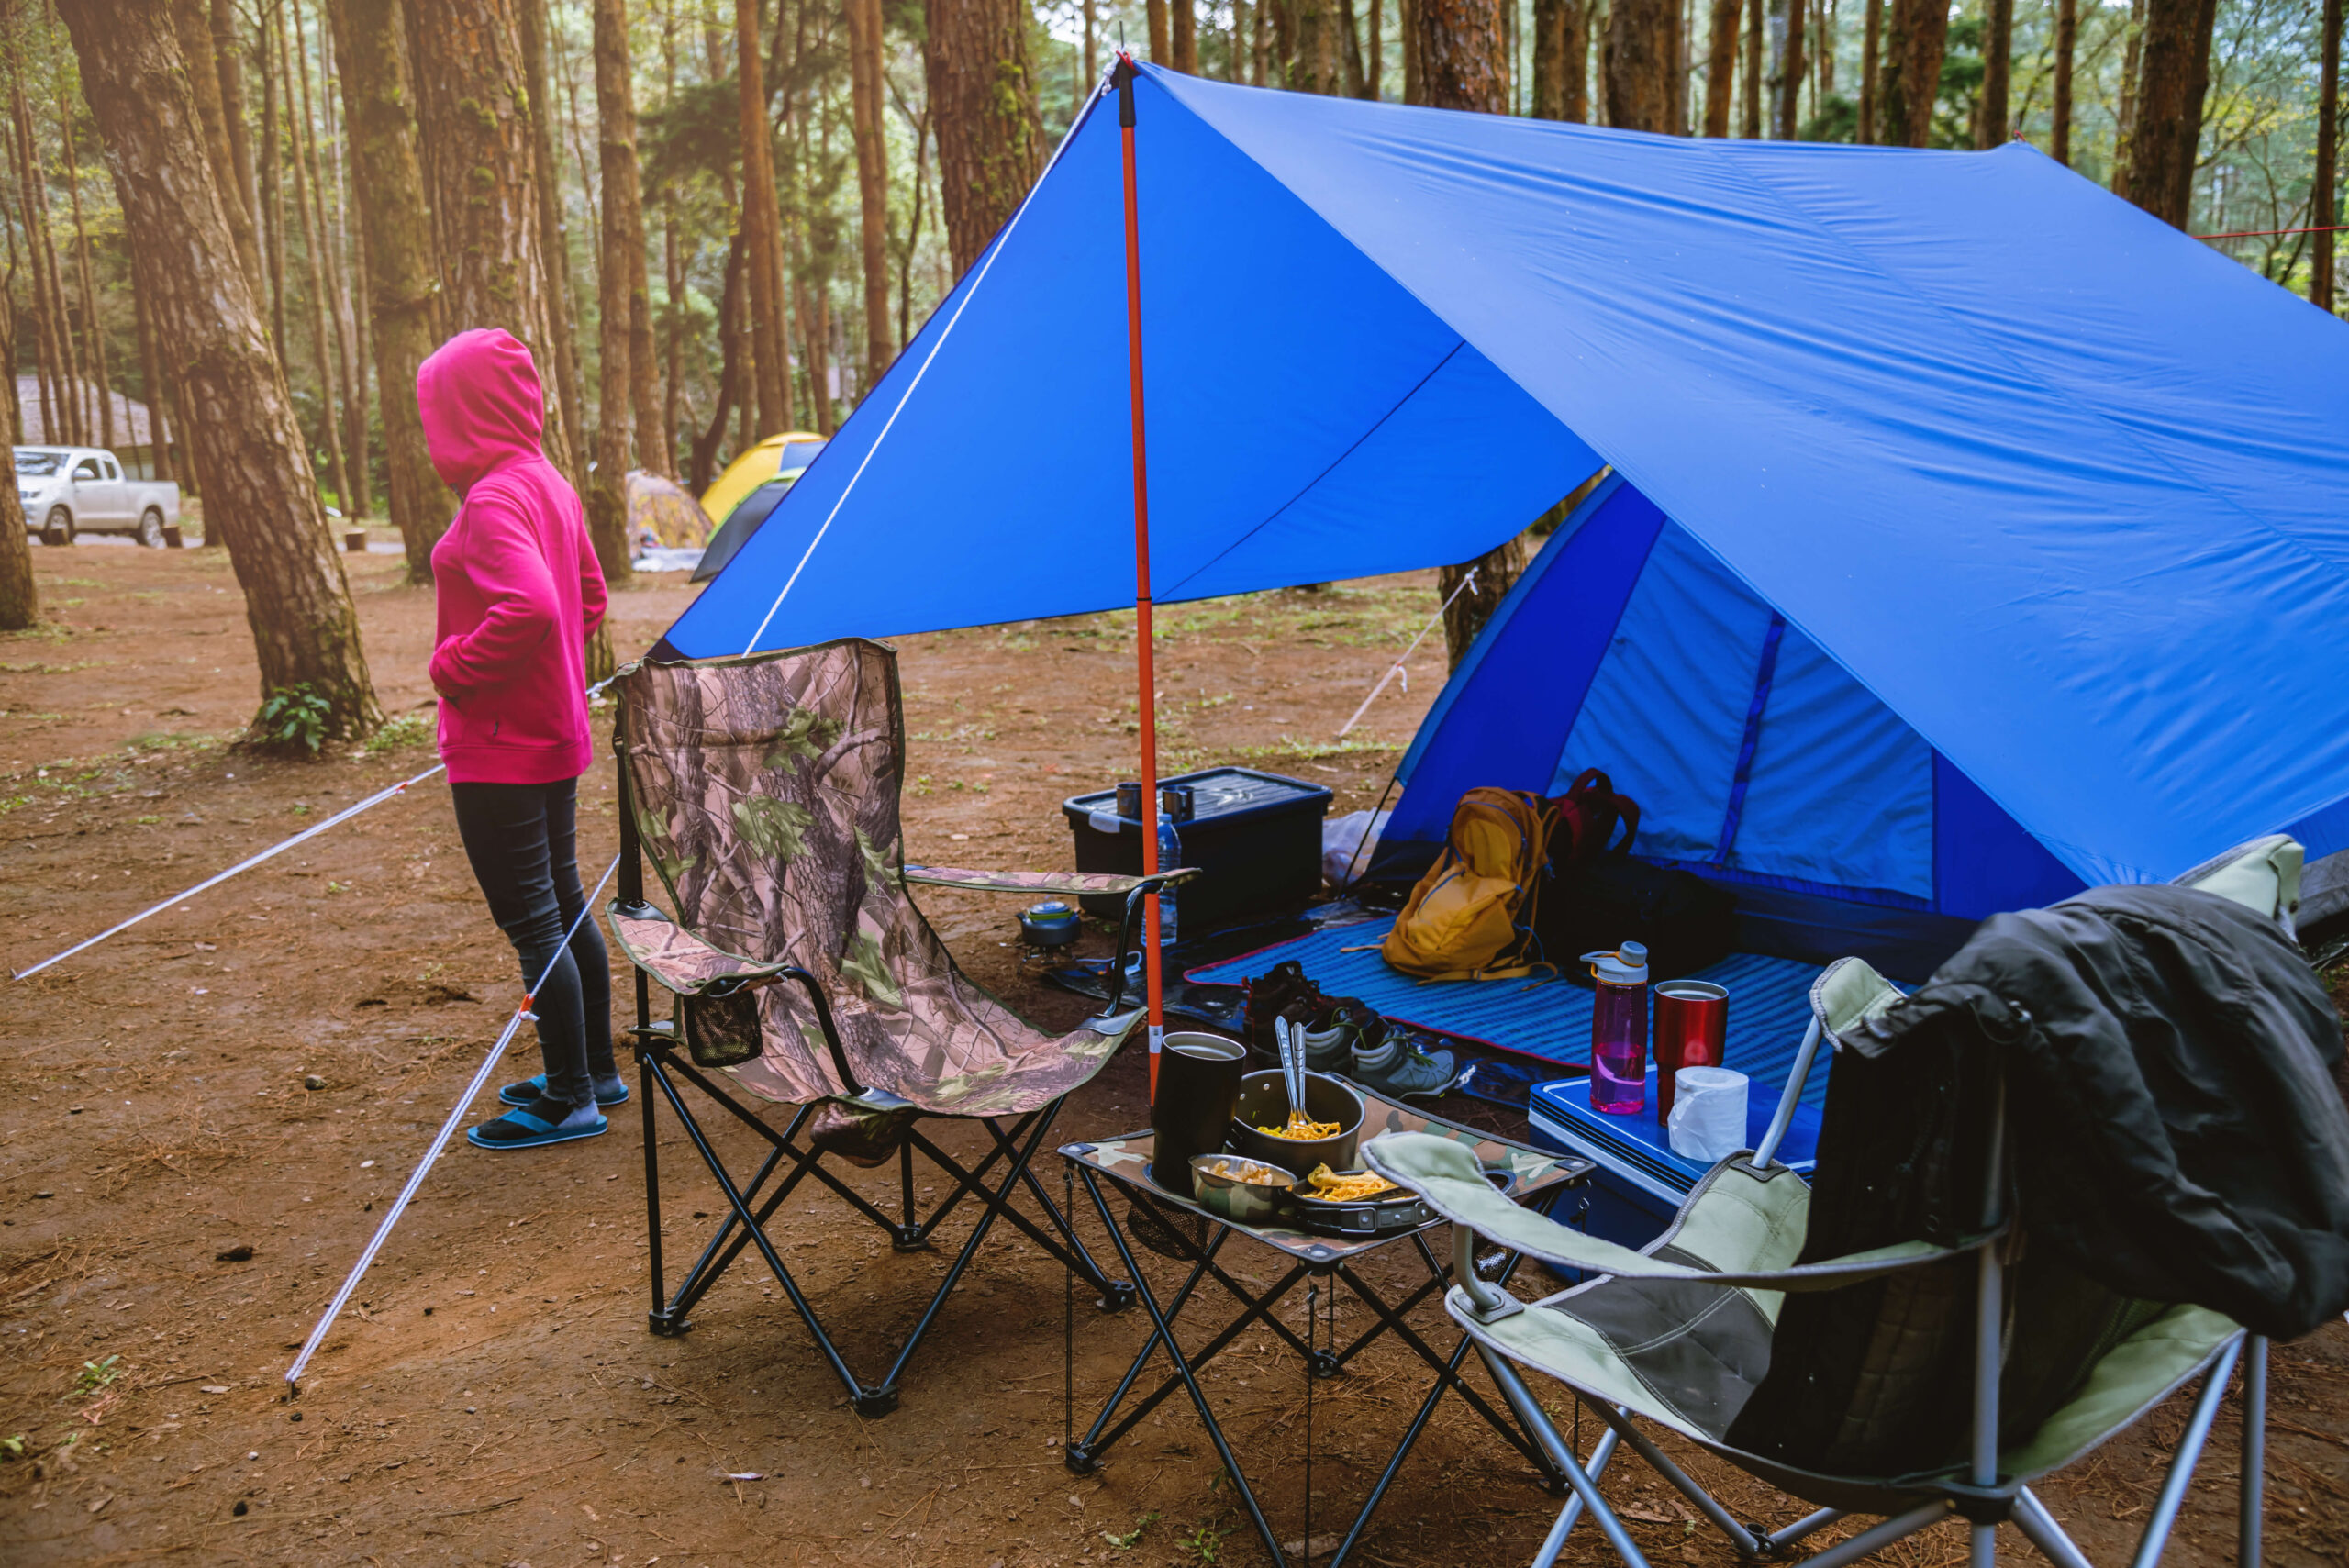 tips for camping in the rain